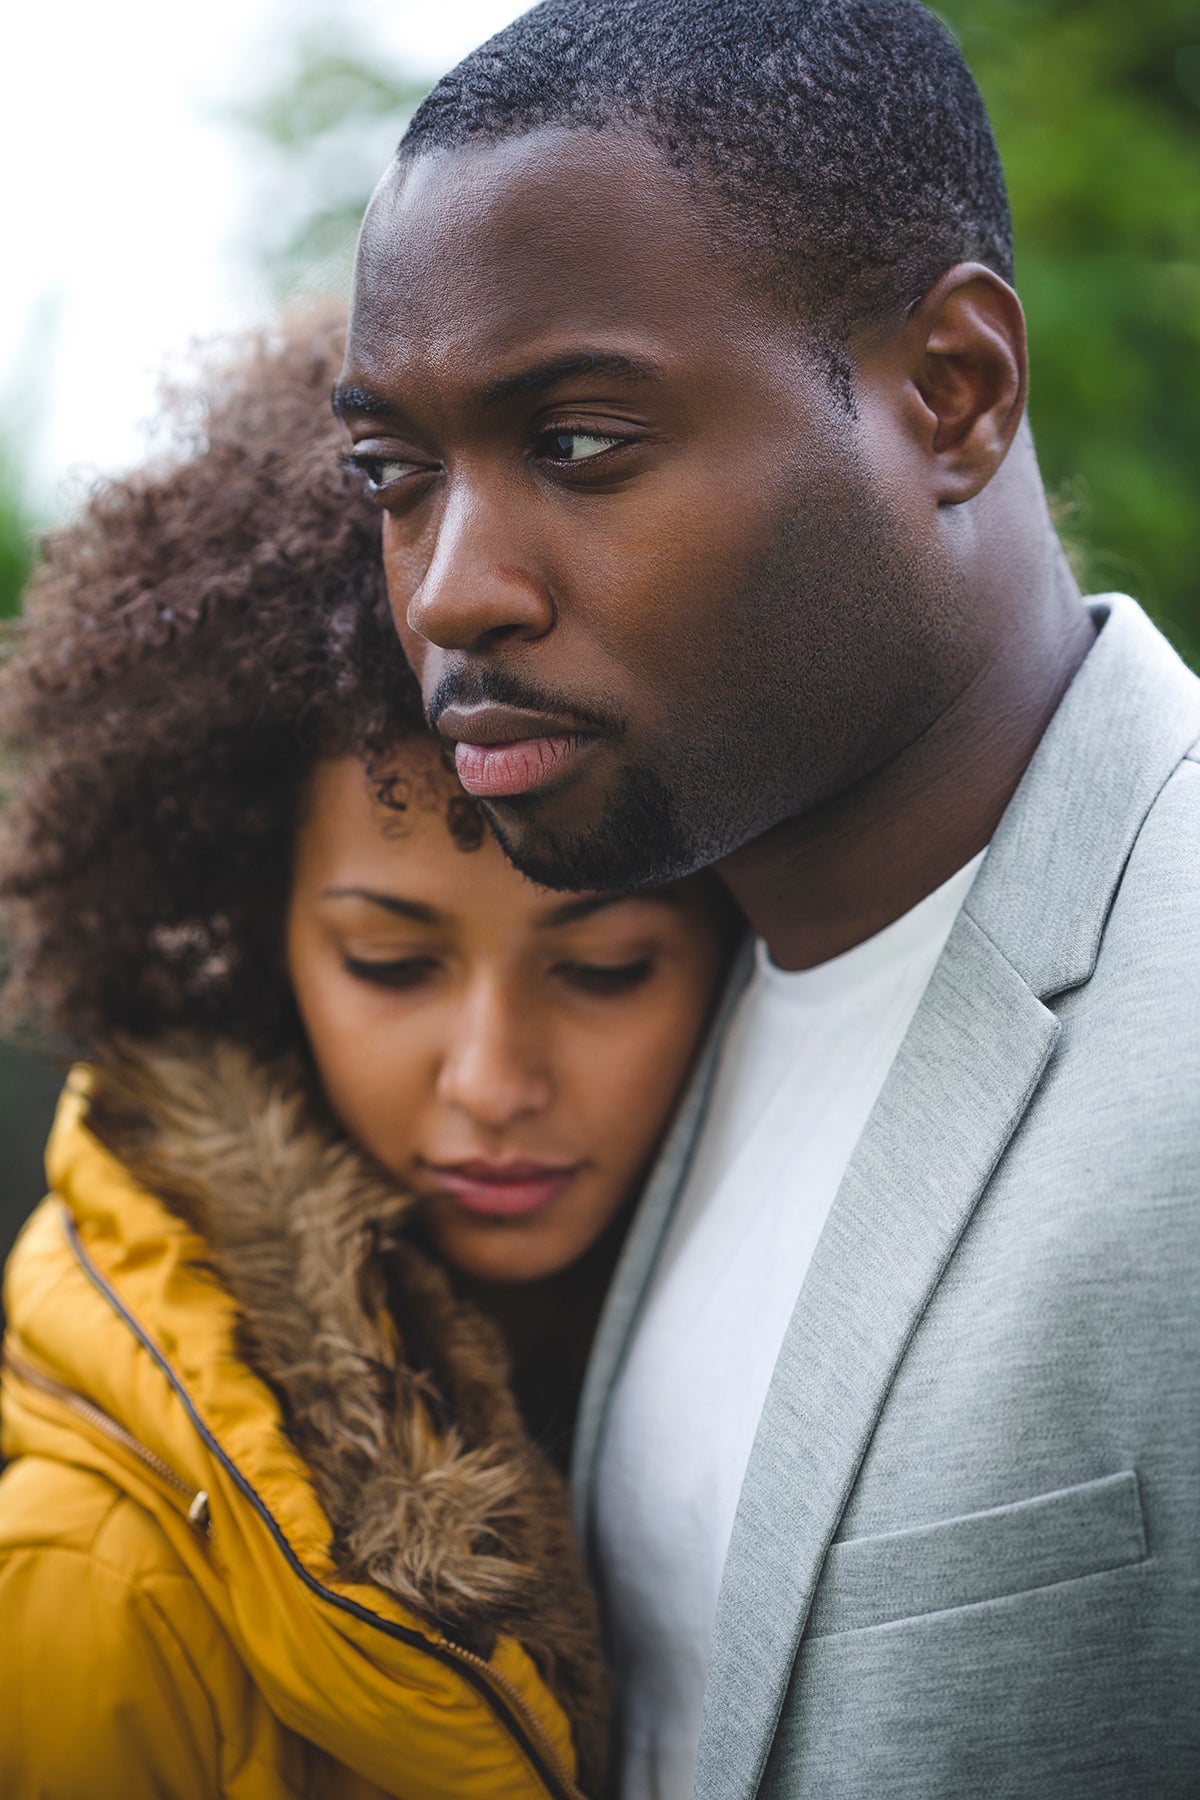 12 Things You Should Never Have to Do To Keep His Love
